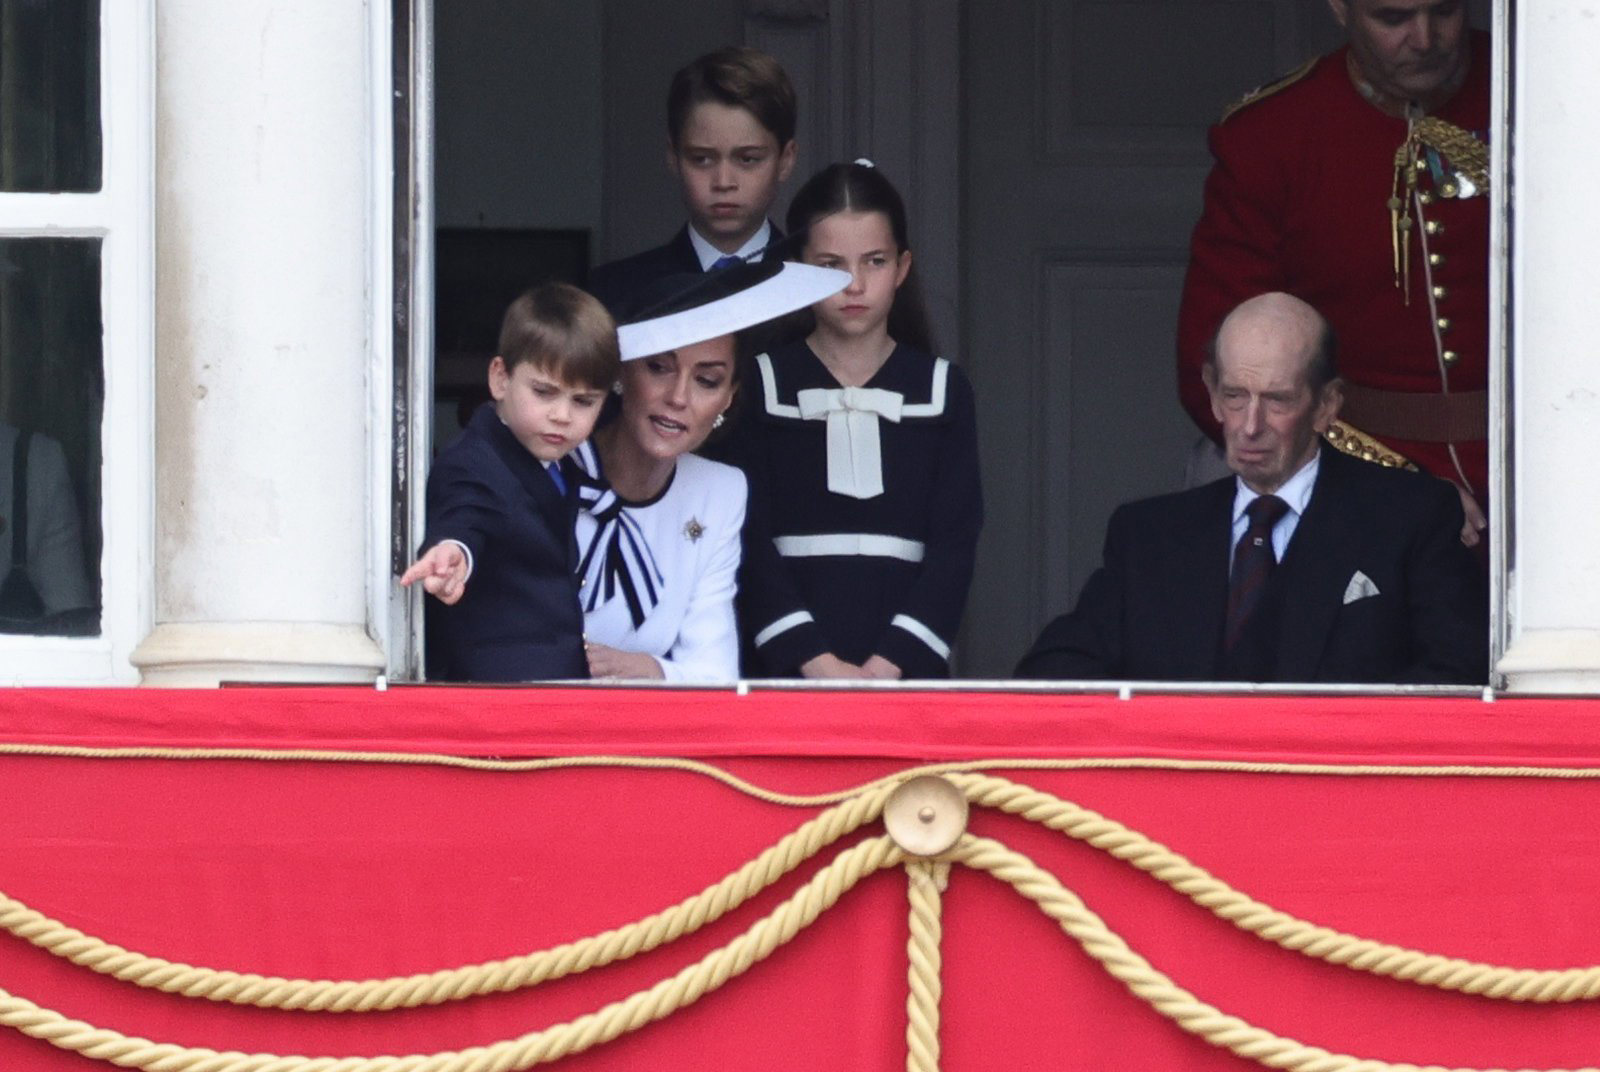 Smiling Kate waves to crowds with Louis, Charlotte and George